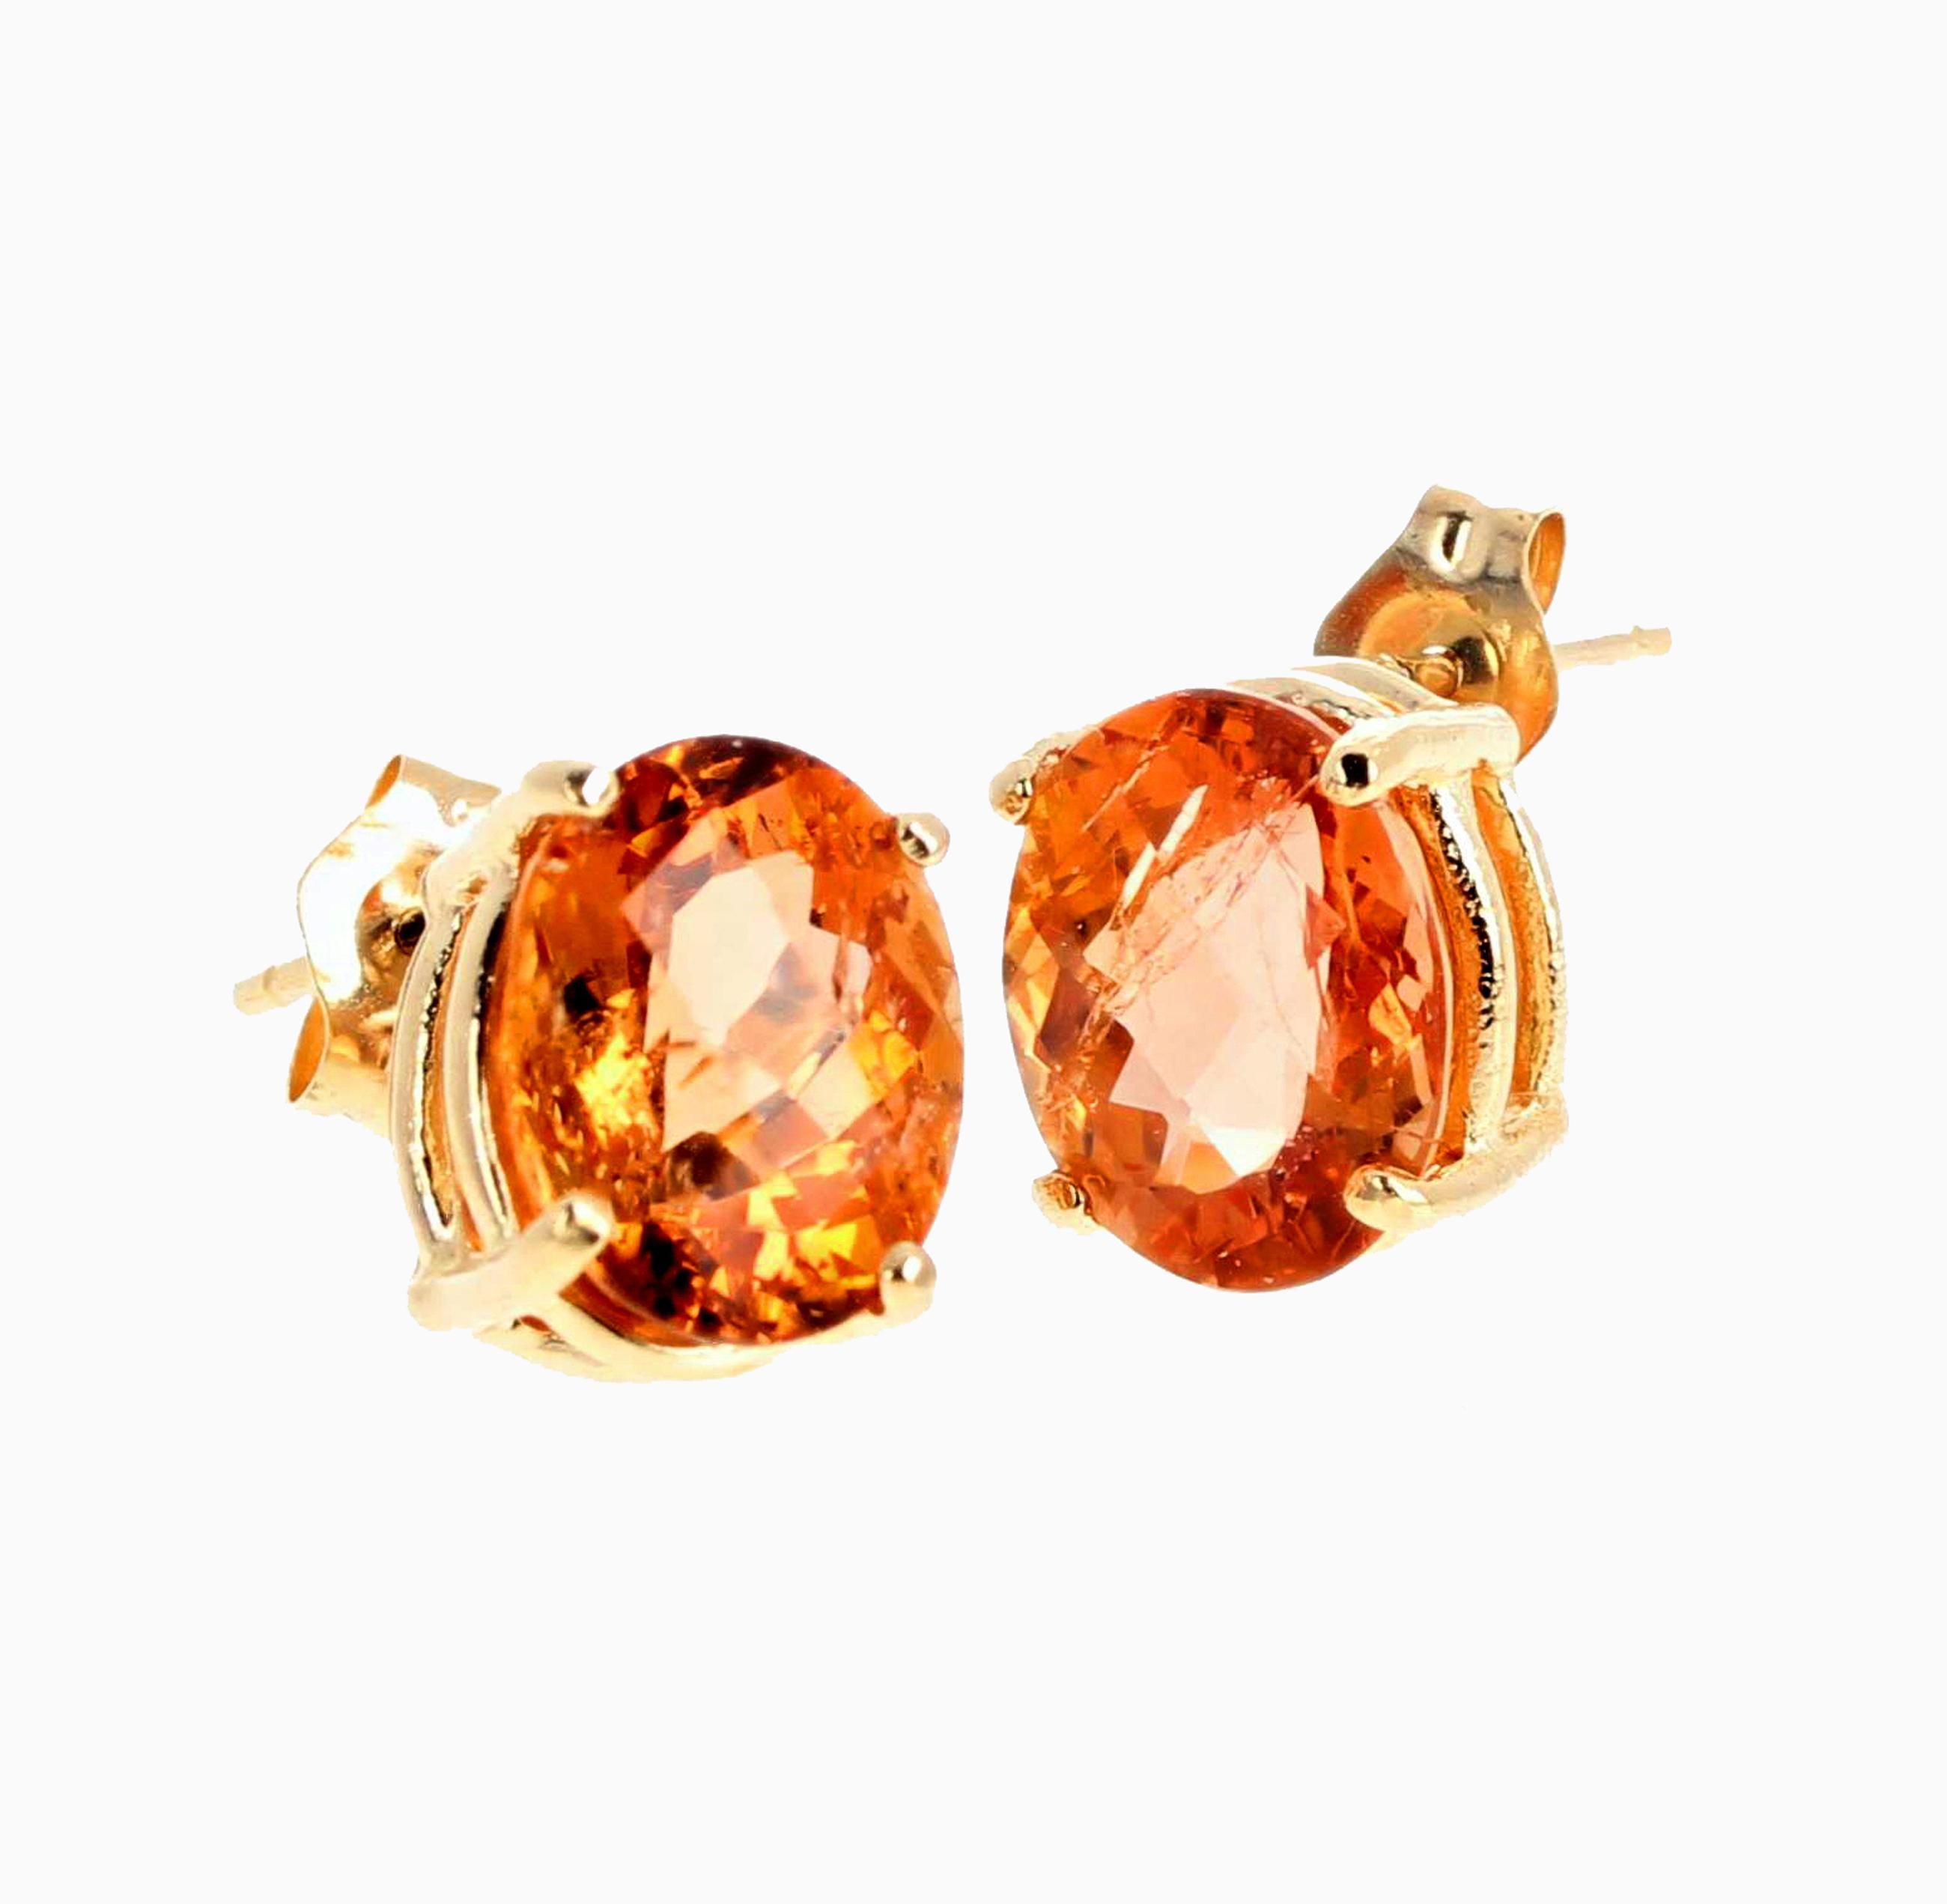 These beautiful glittering Orangy natural Tourmalines (2.45 carats each approximately) are set in 14Kt yellow gold stud earrings.  The gemstones measure 9.3mm x 7.7mm.  There are no eye visible inclusions in either gemstone.  